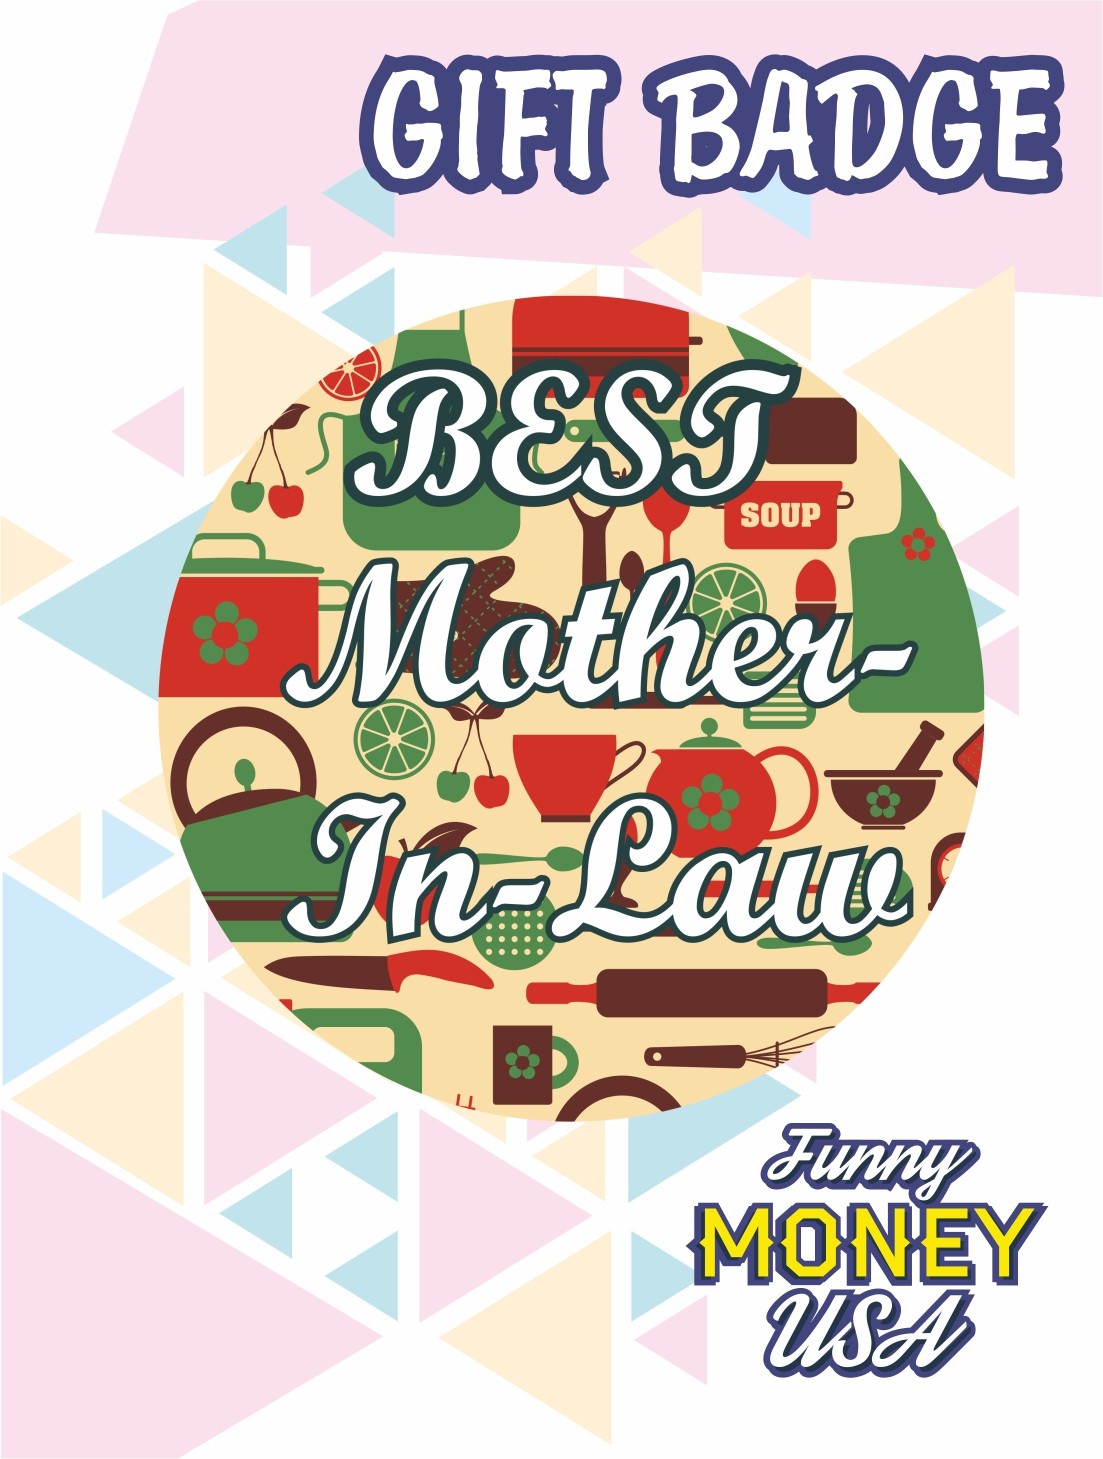 Gift badges "Best Mother in-low"